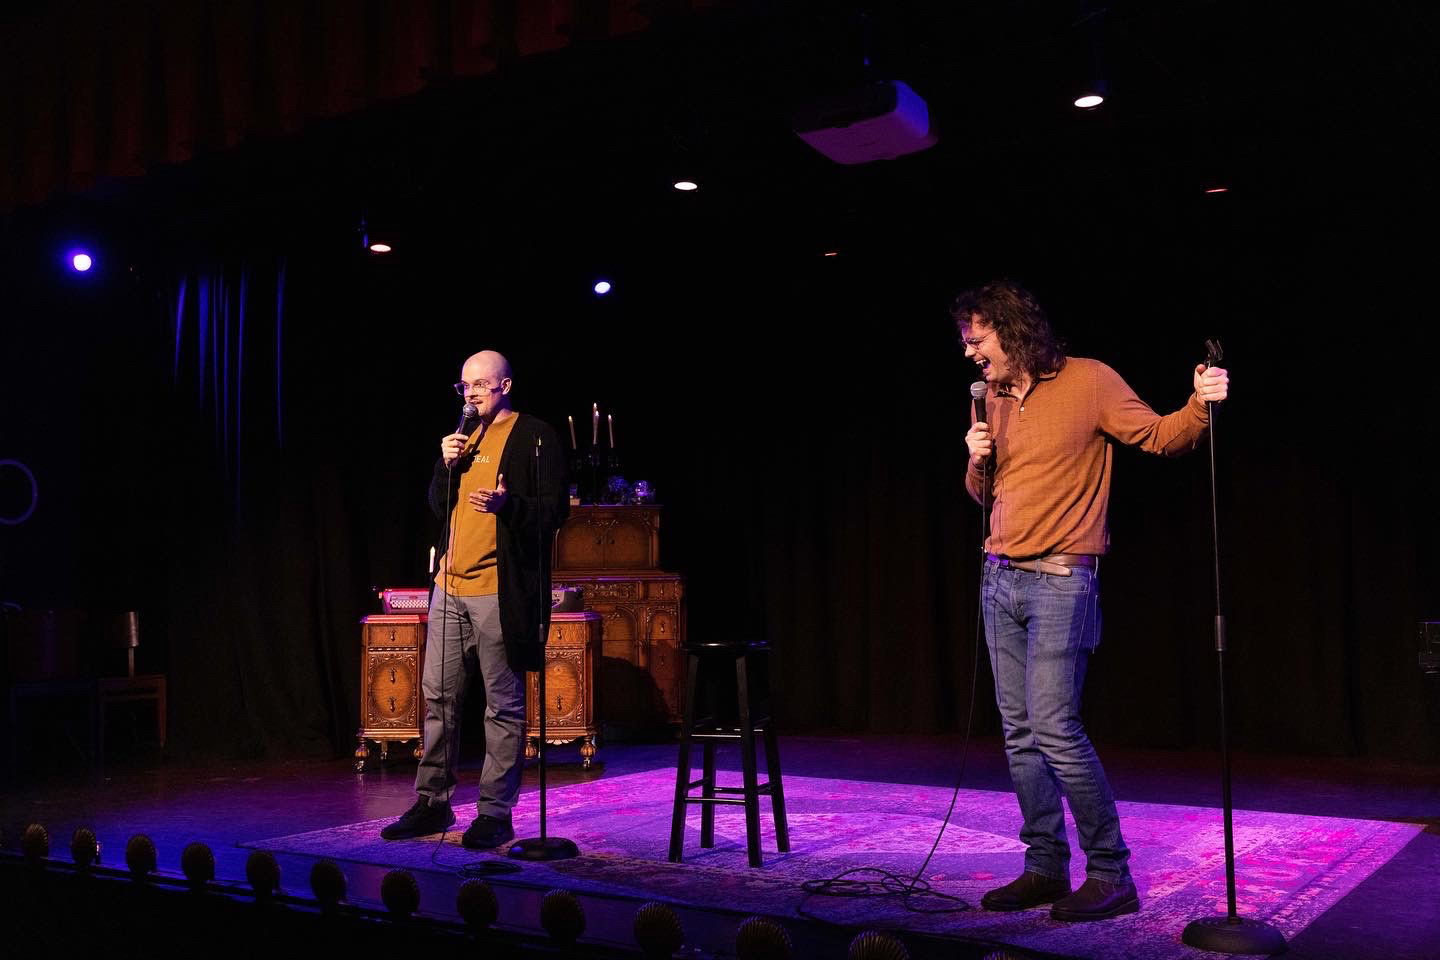 Scott Seven and Michael Raley performing Stand Up Comedy